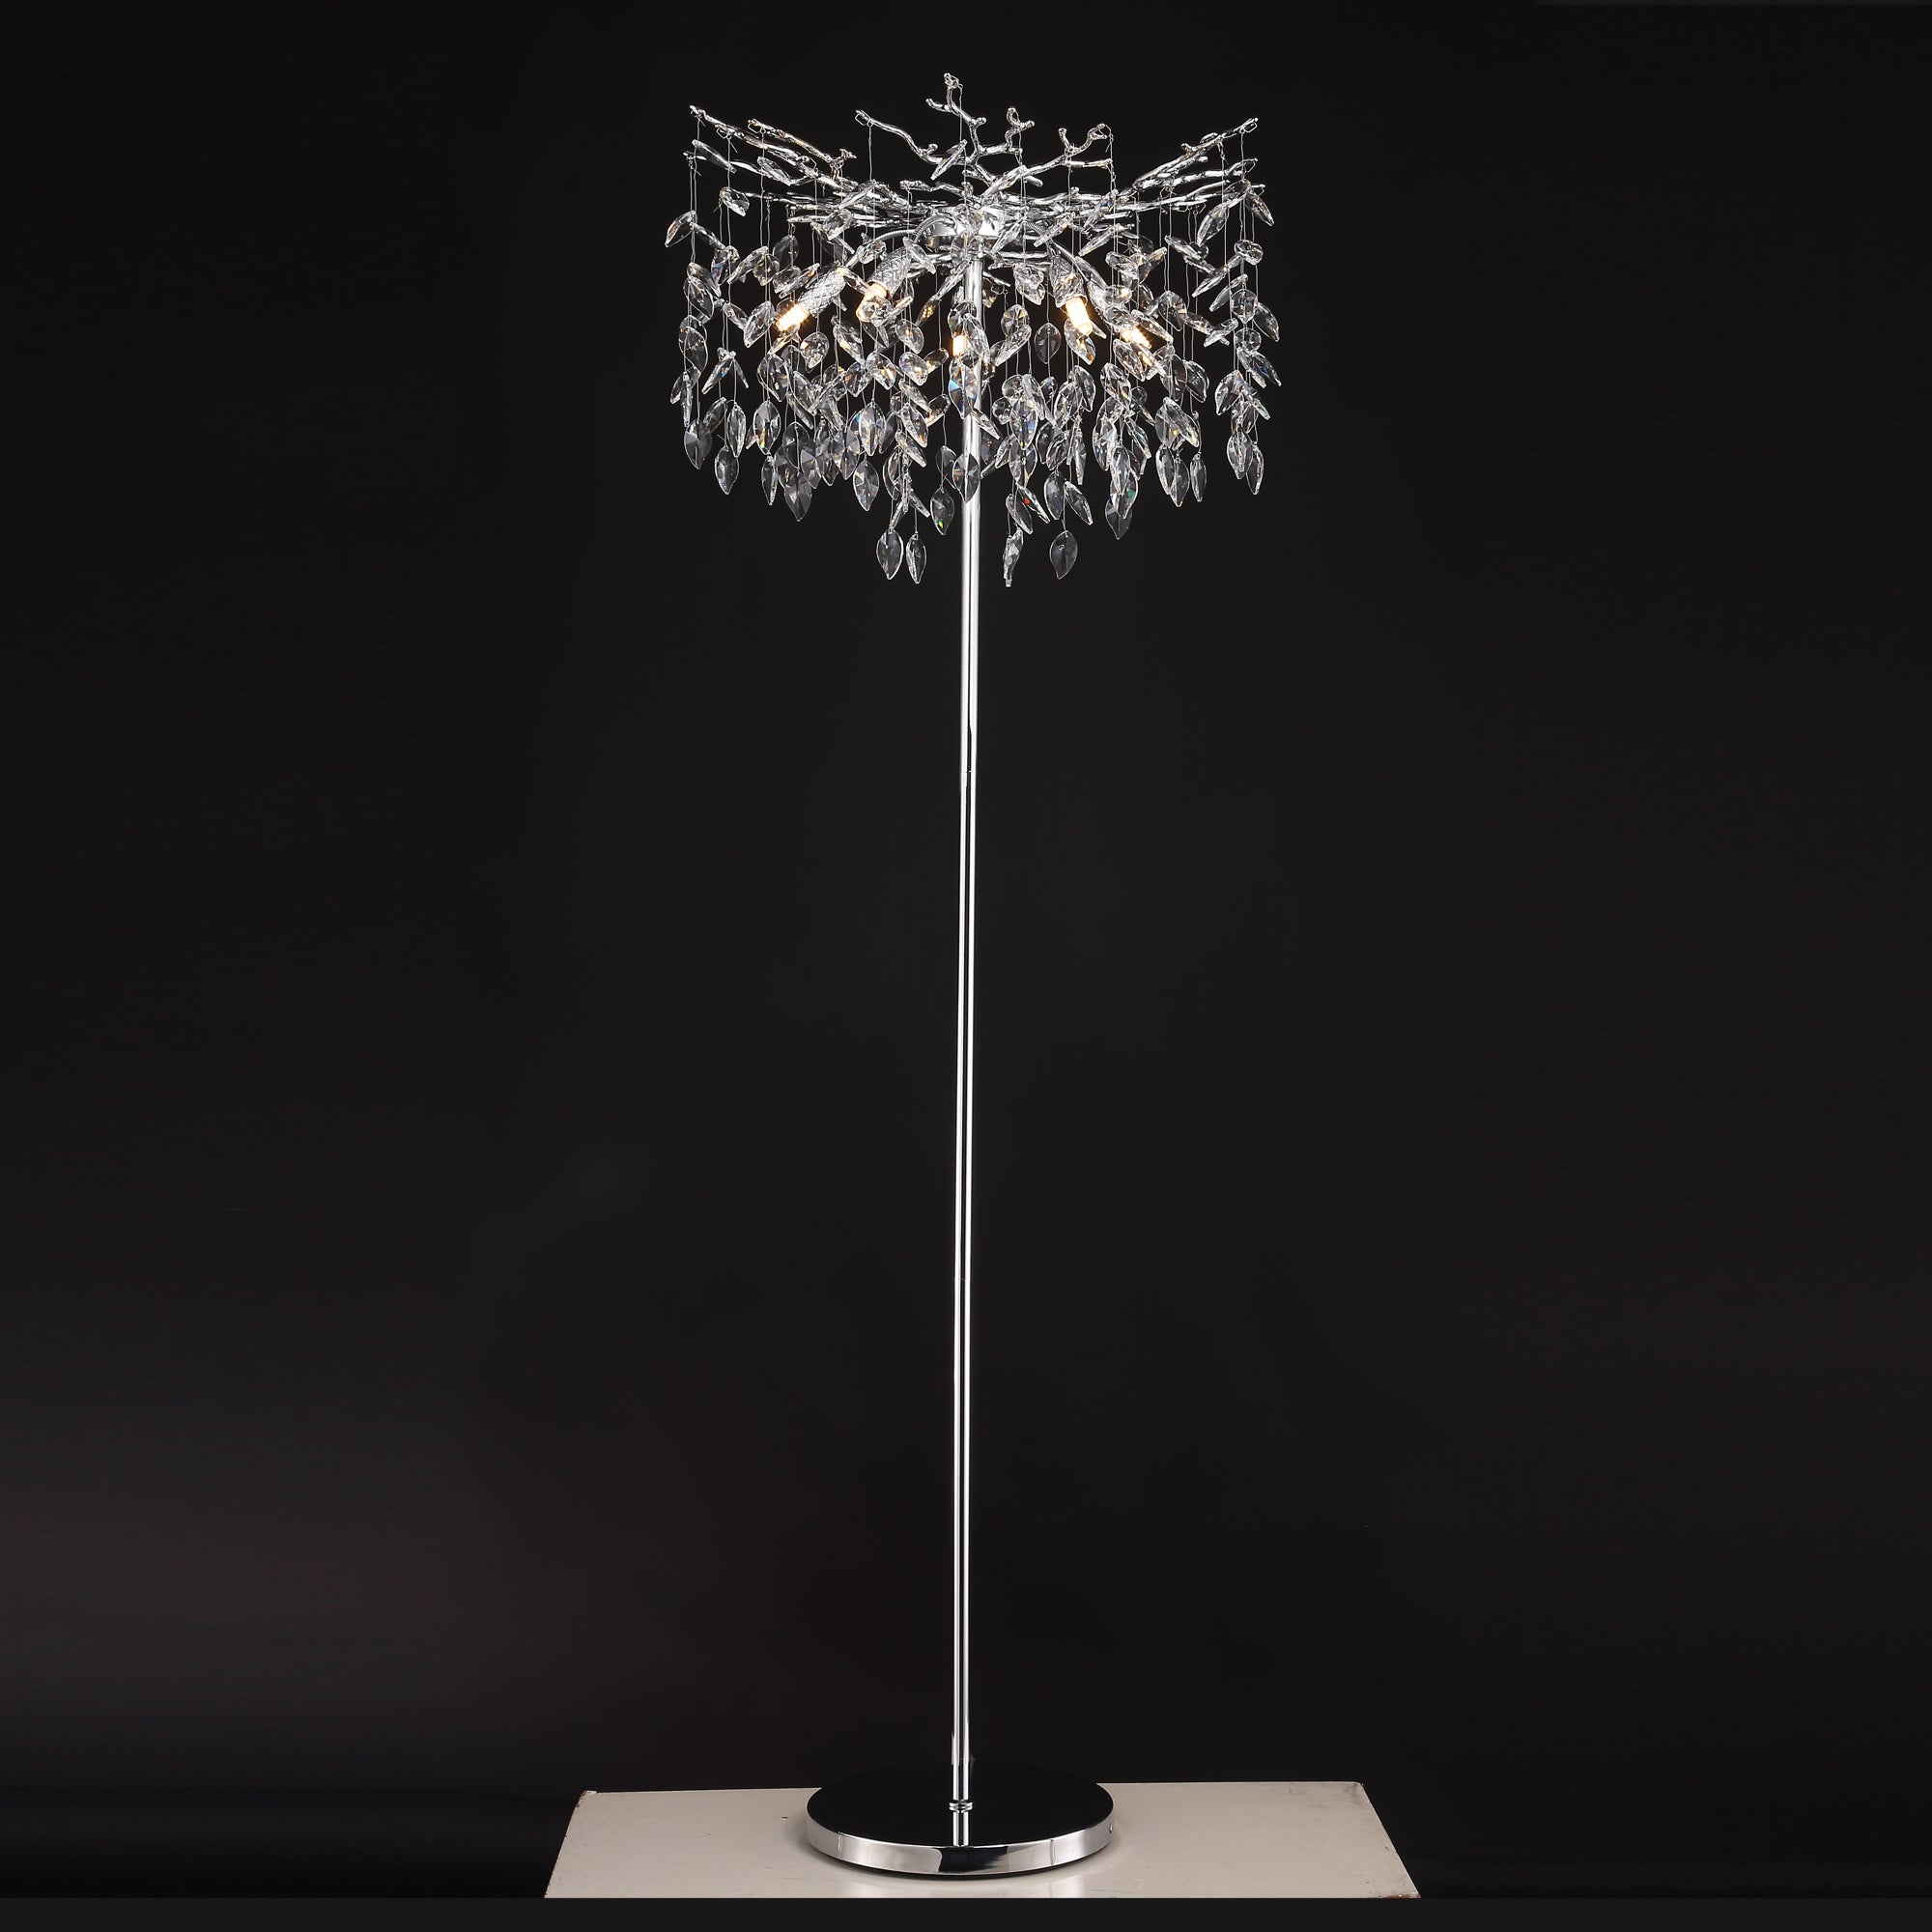 Clea Modern Gold Clear Crystal Floor Lamp For Bedroom, Living Room